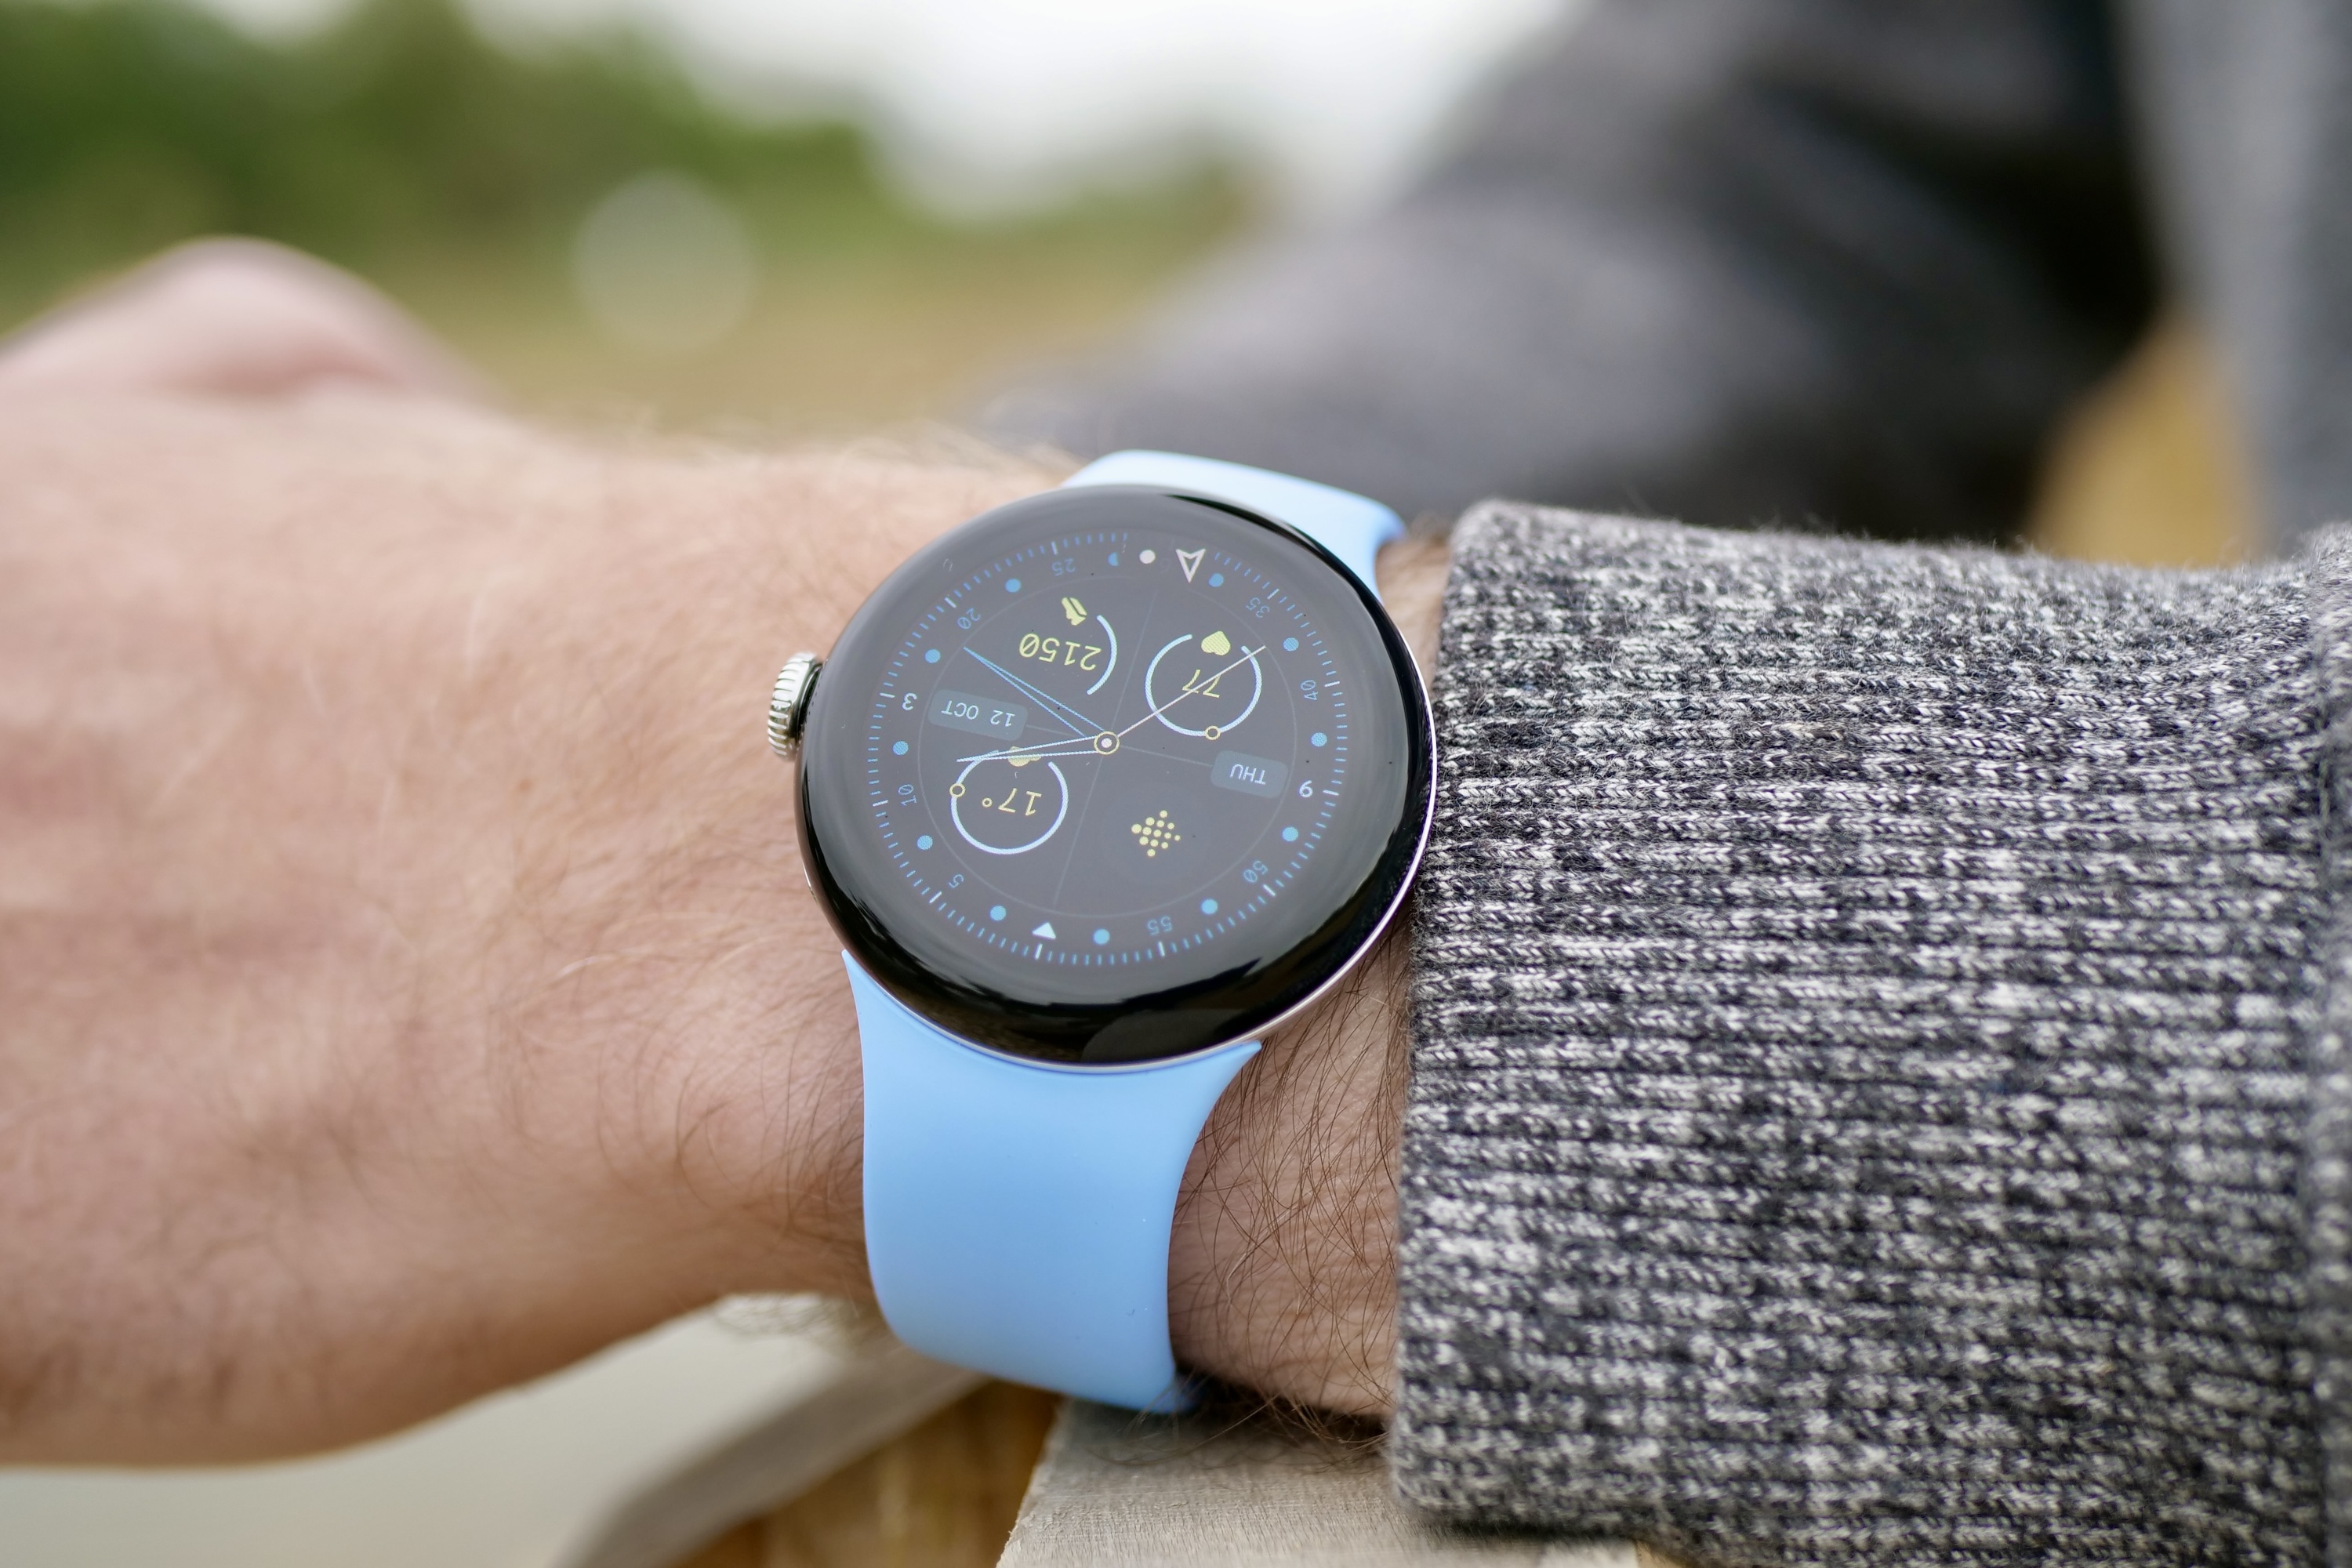 Google Pixel Watch 2 review: Google really did it